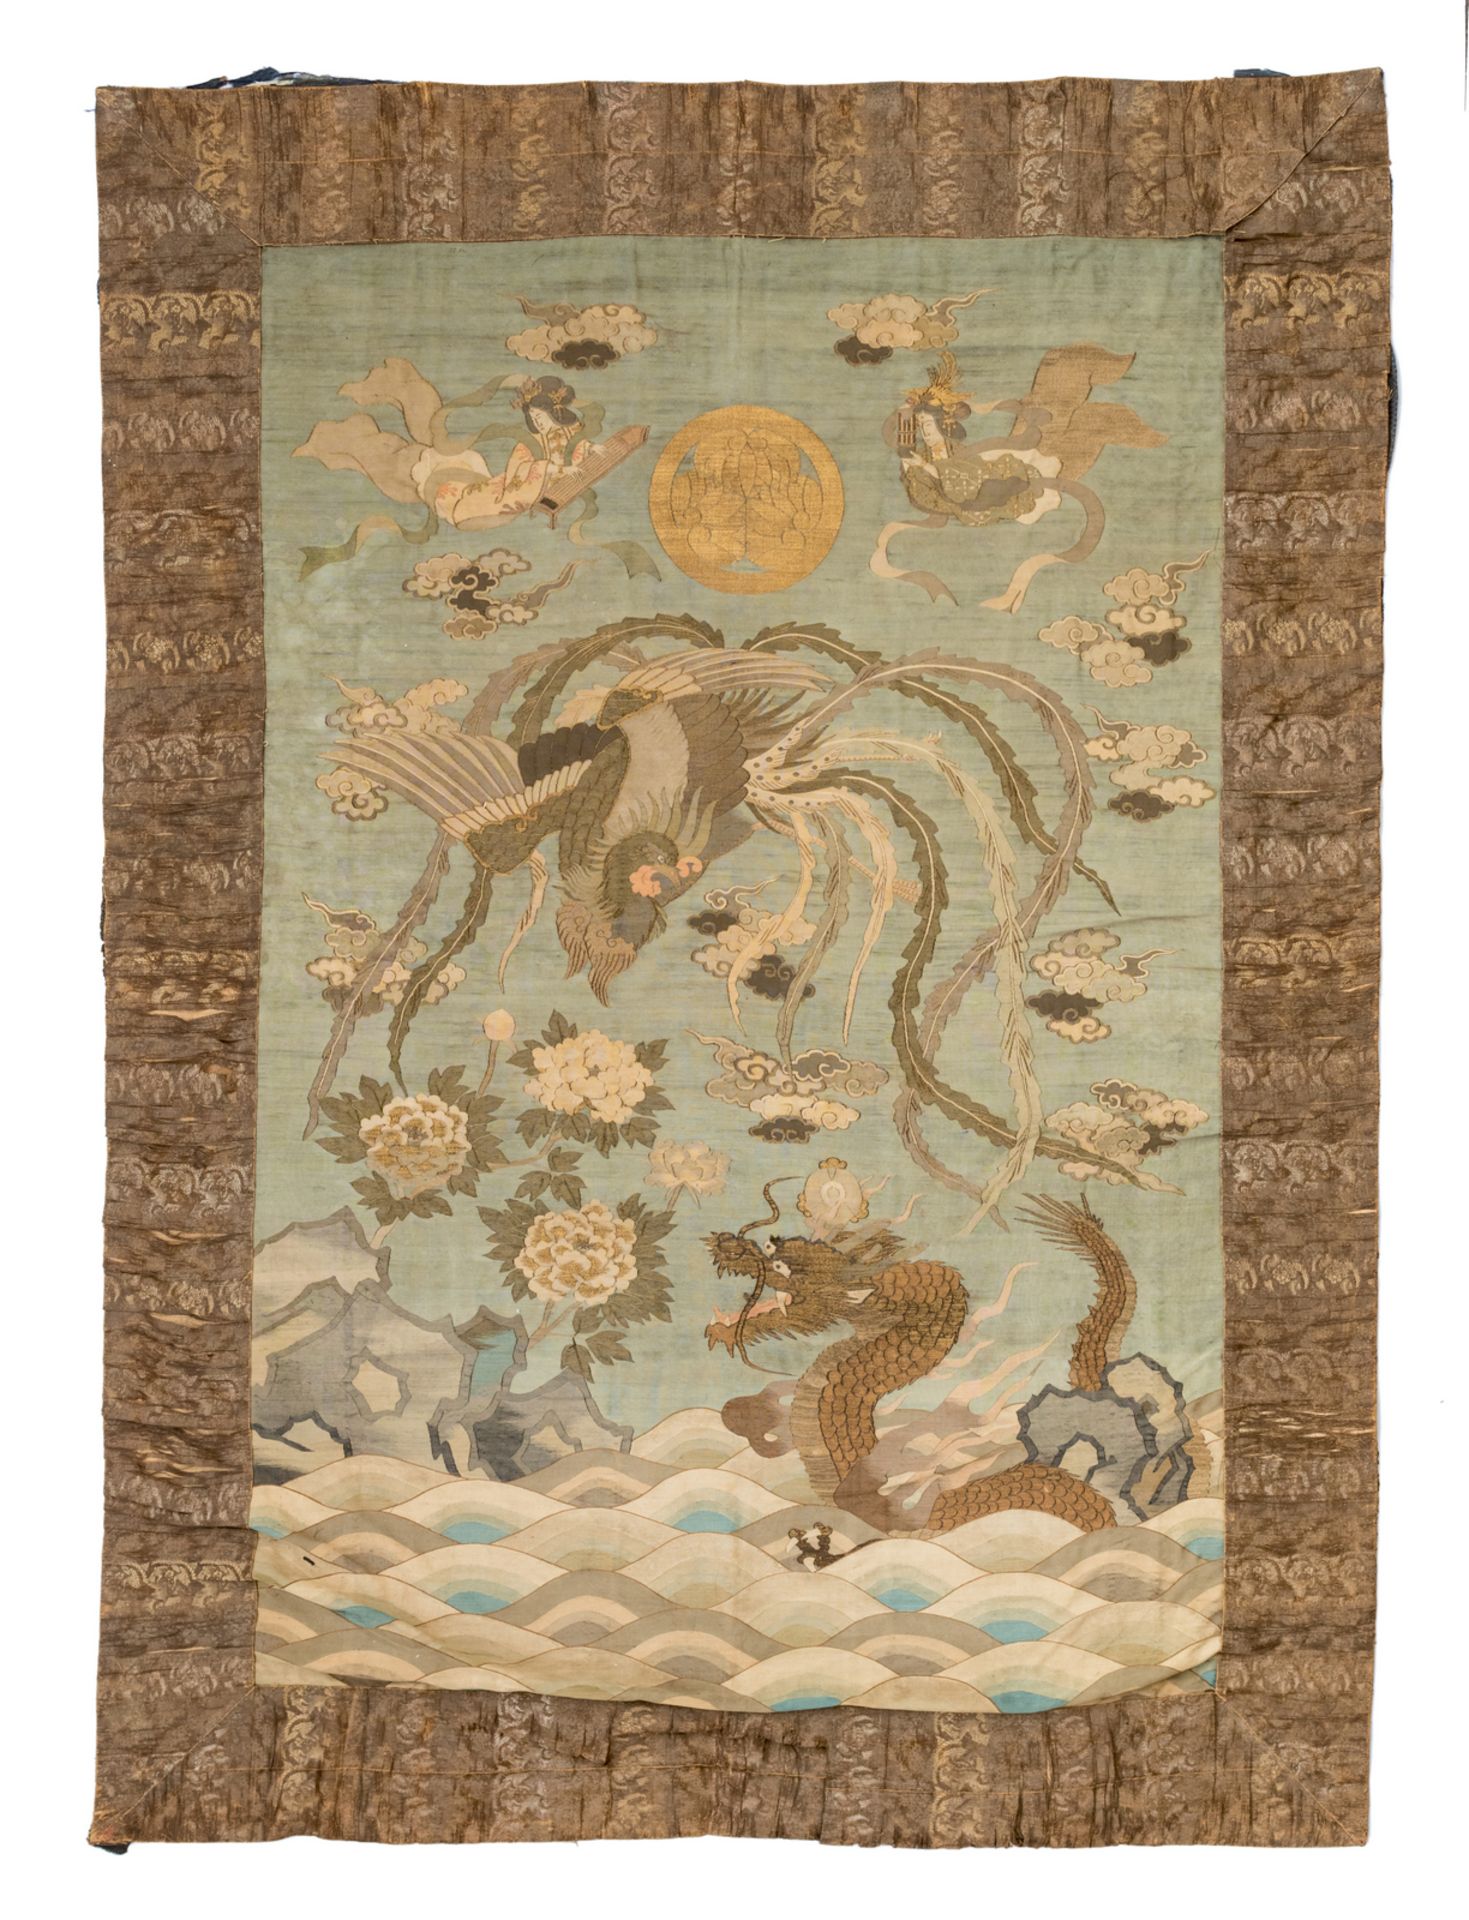 A fine Japanese embroidered silk and gold thread wall tapestry, depicting a dragon holding a flaming